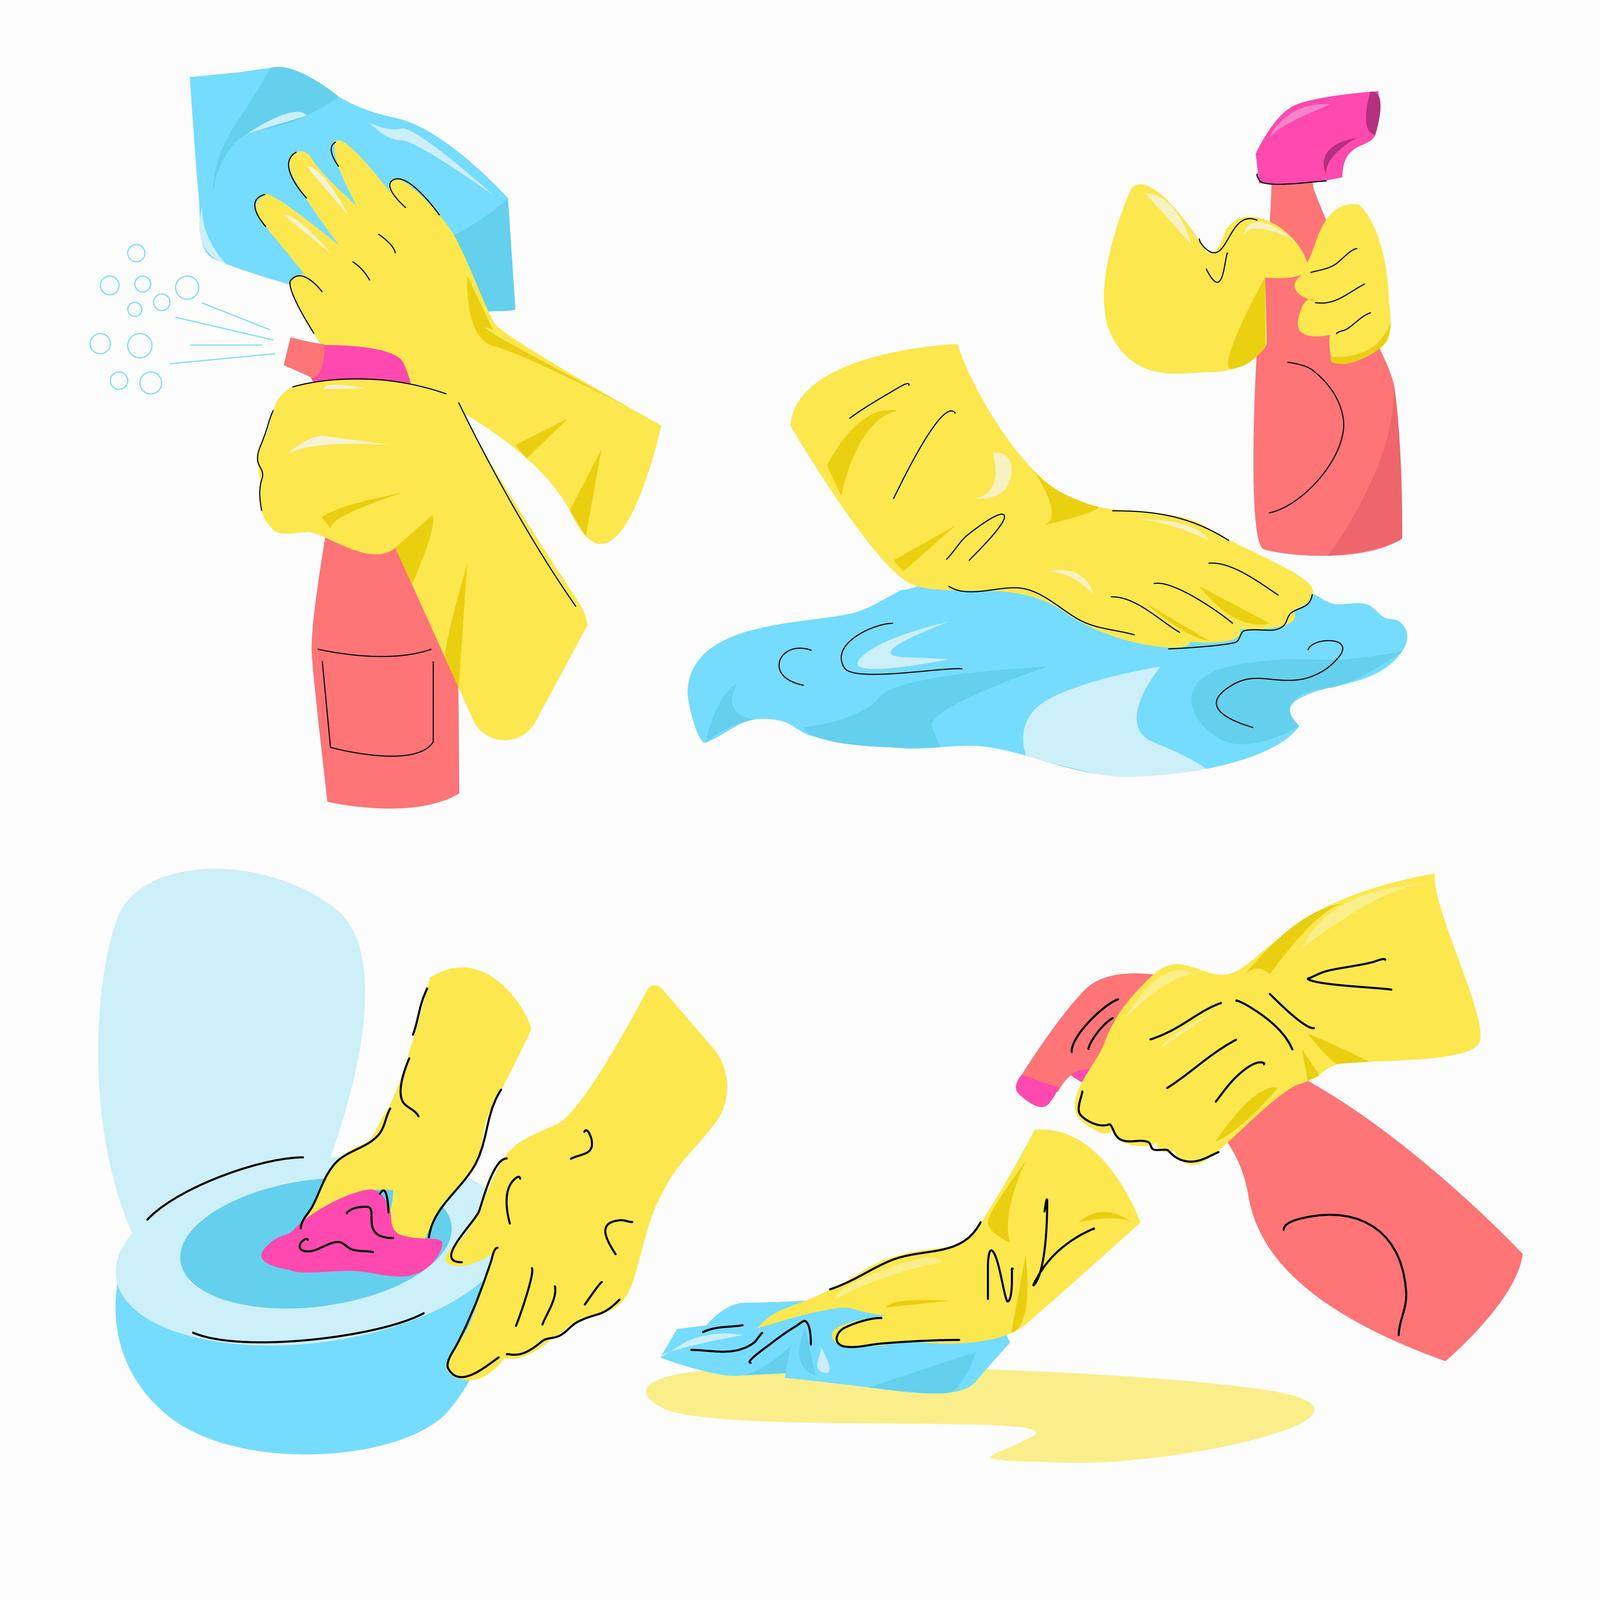 Yellow-gloved hands wash and clean various surfaces. Illustration on the topic of cleaning and cleanliness and disinfection.